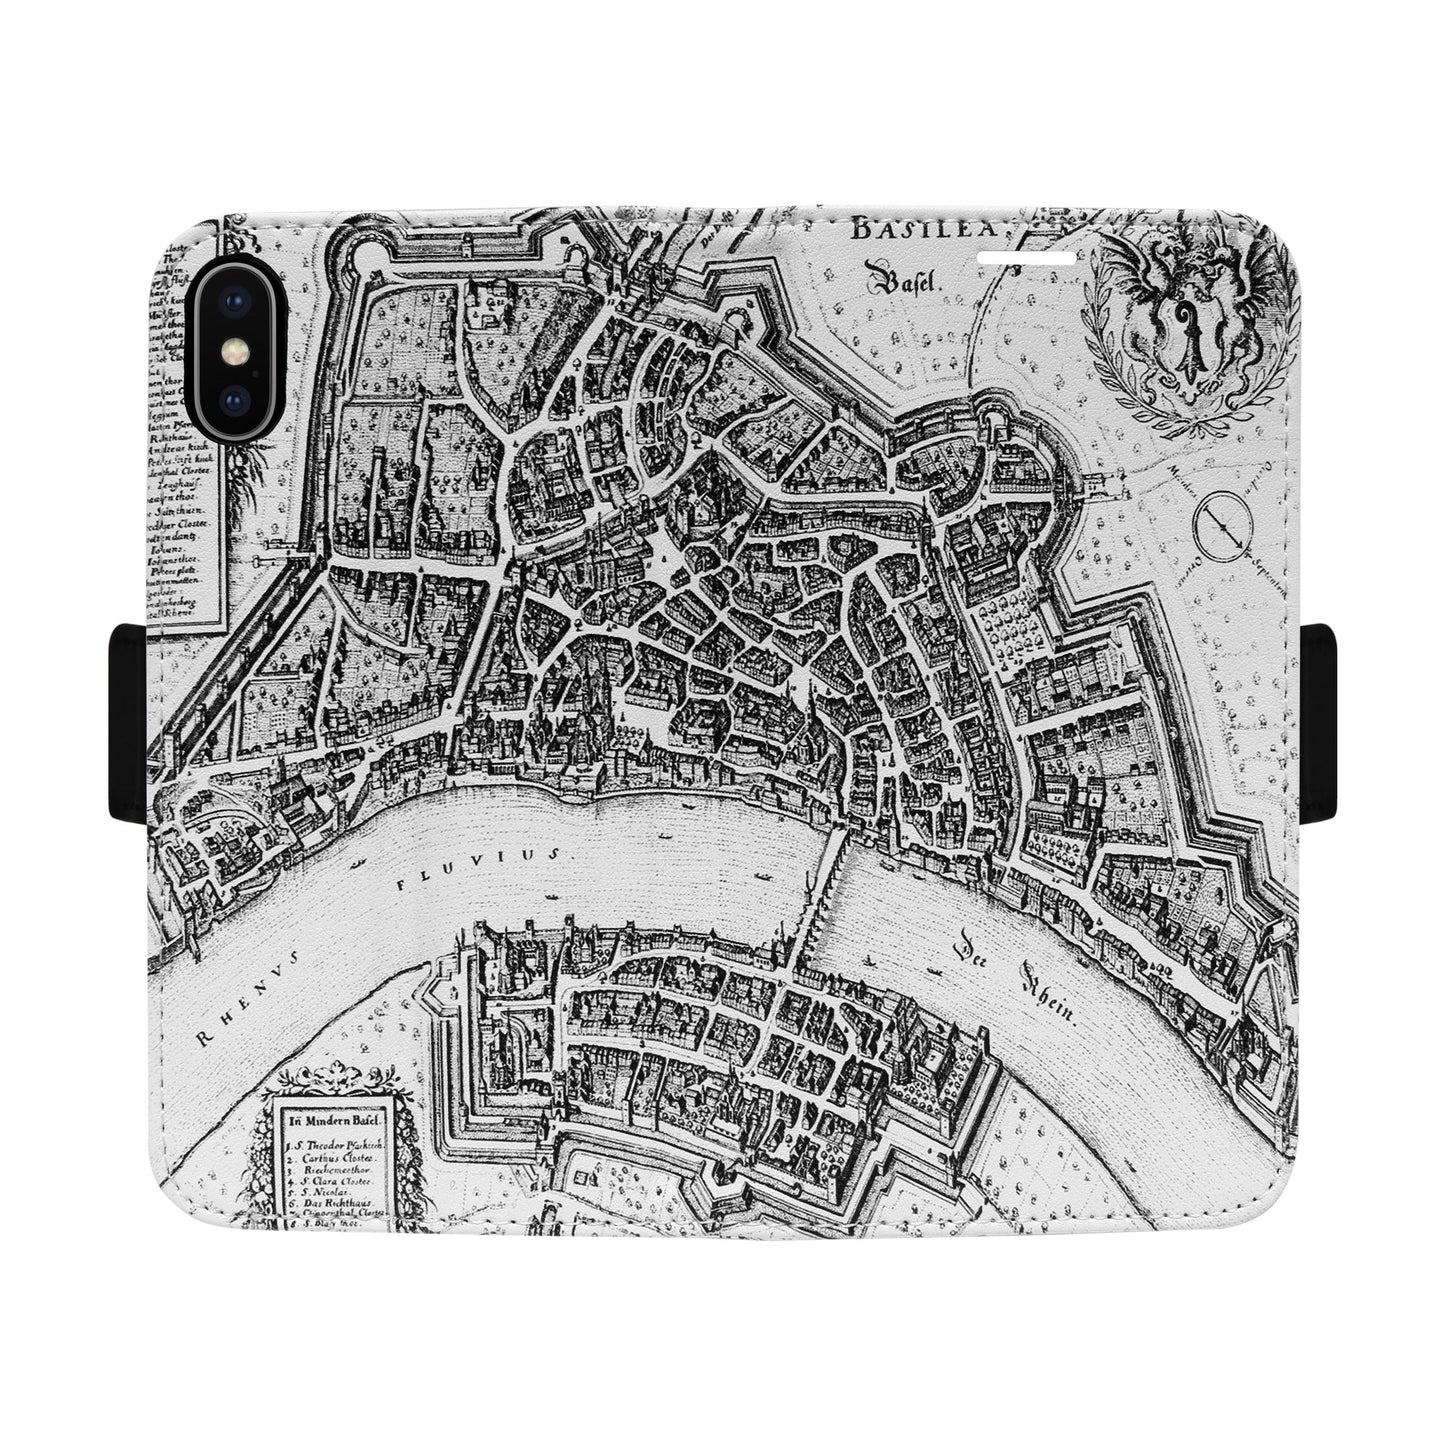 Basel Merian Victor Case for iPhone XS Max